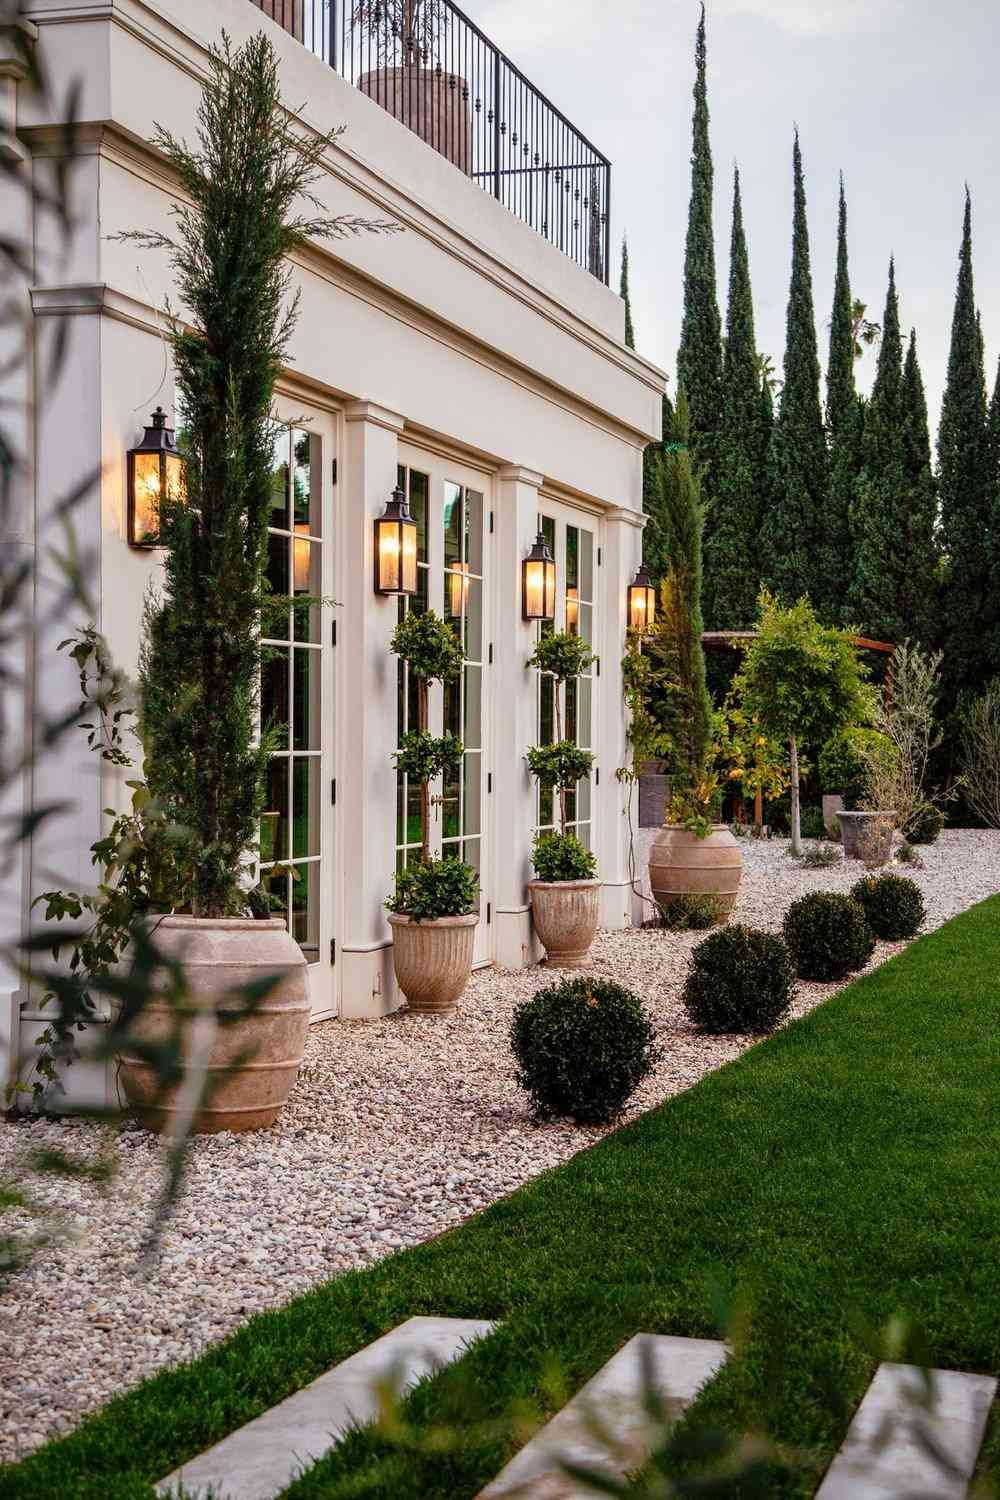 Creative Front Yard Landscaping Ideas for a Contemporary Look